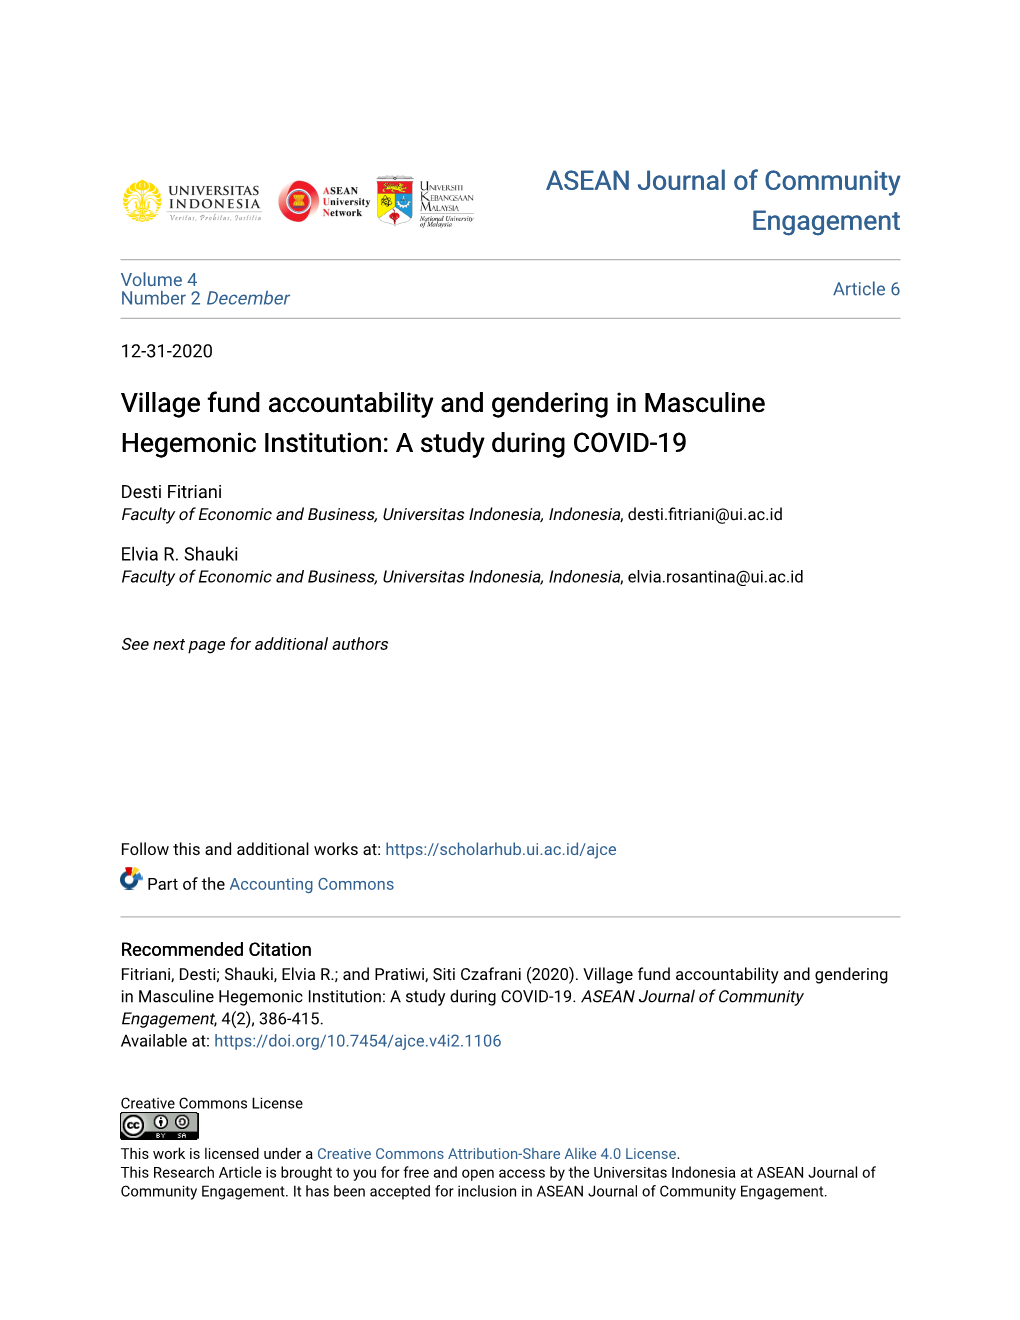 Village Fund Accountability and Gendering in Masculine Hegemonic Institution: a Study During COVID-19